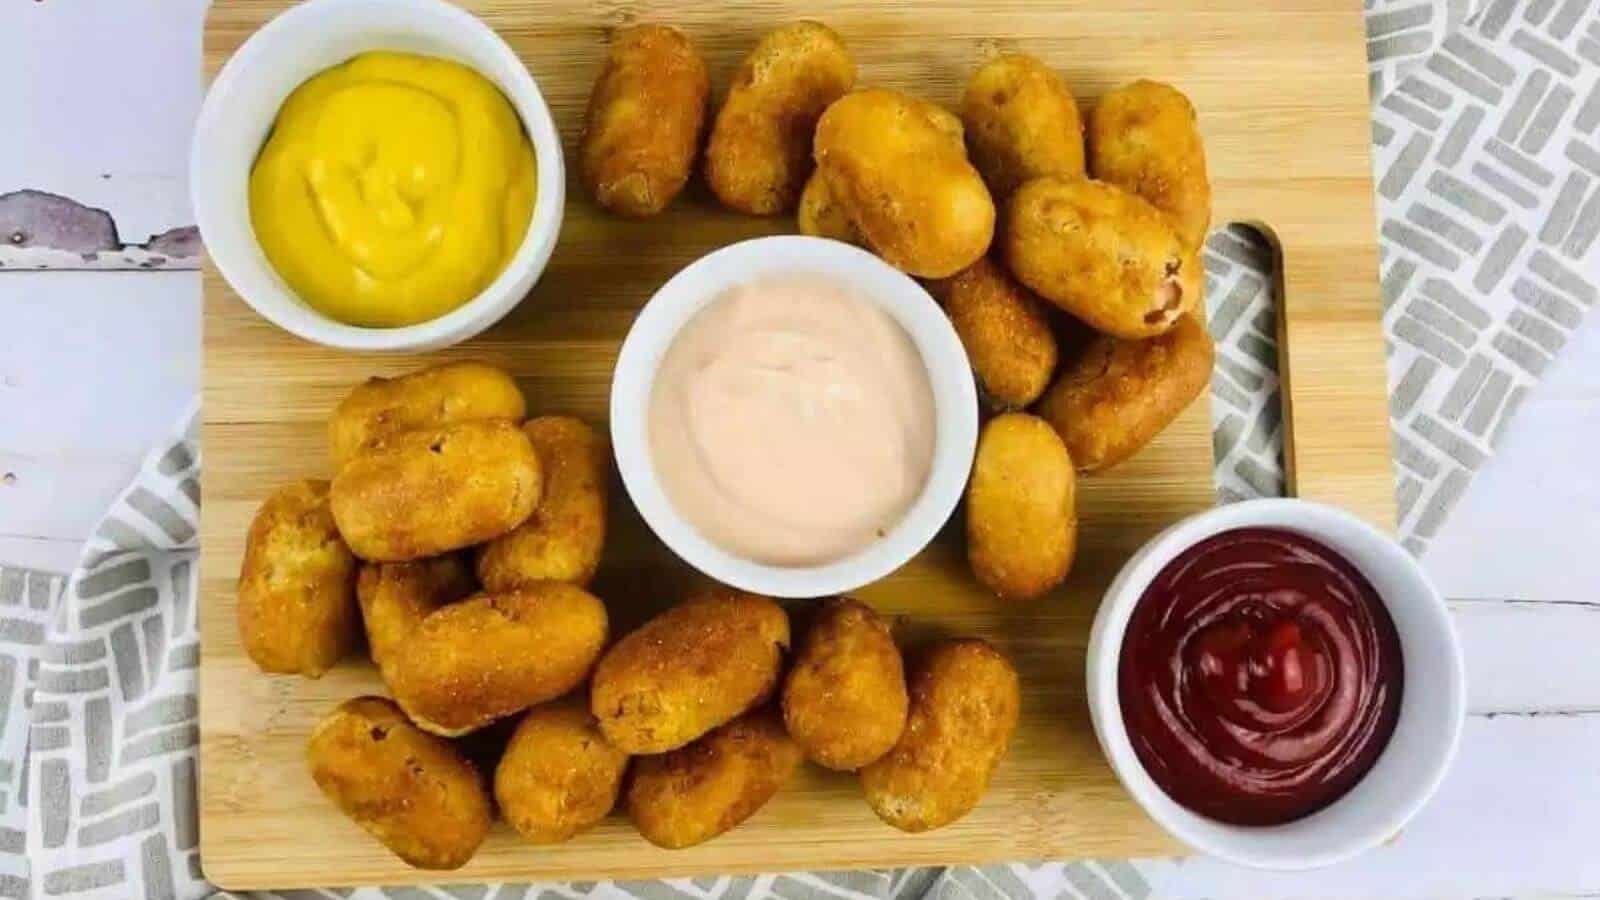 Gluten free corn dogs on a board with dipping sauces.